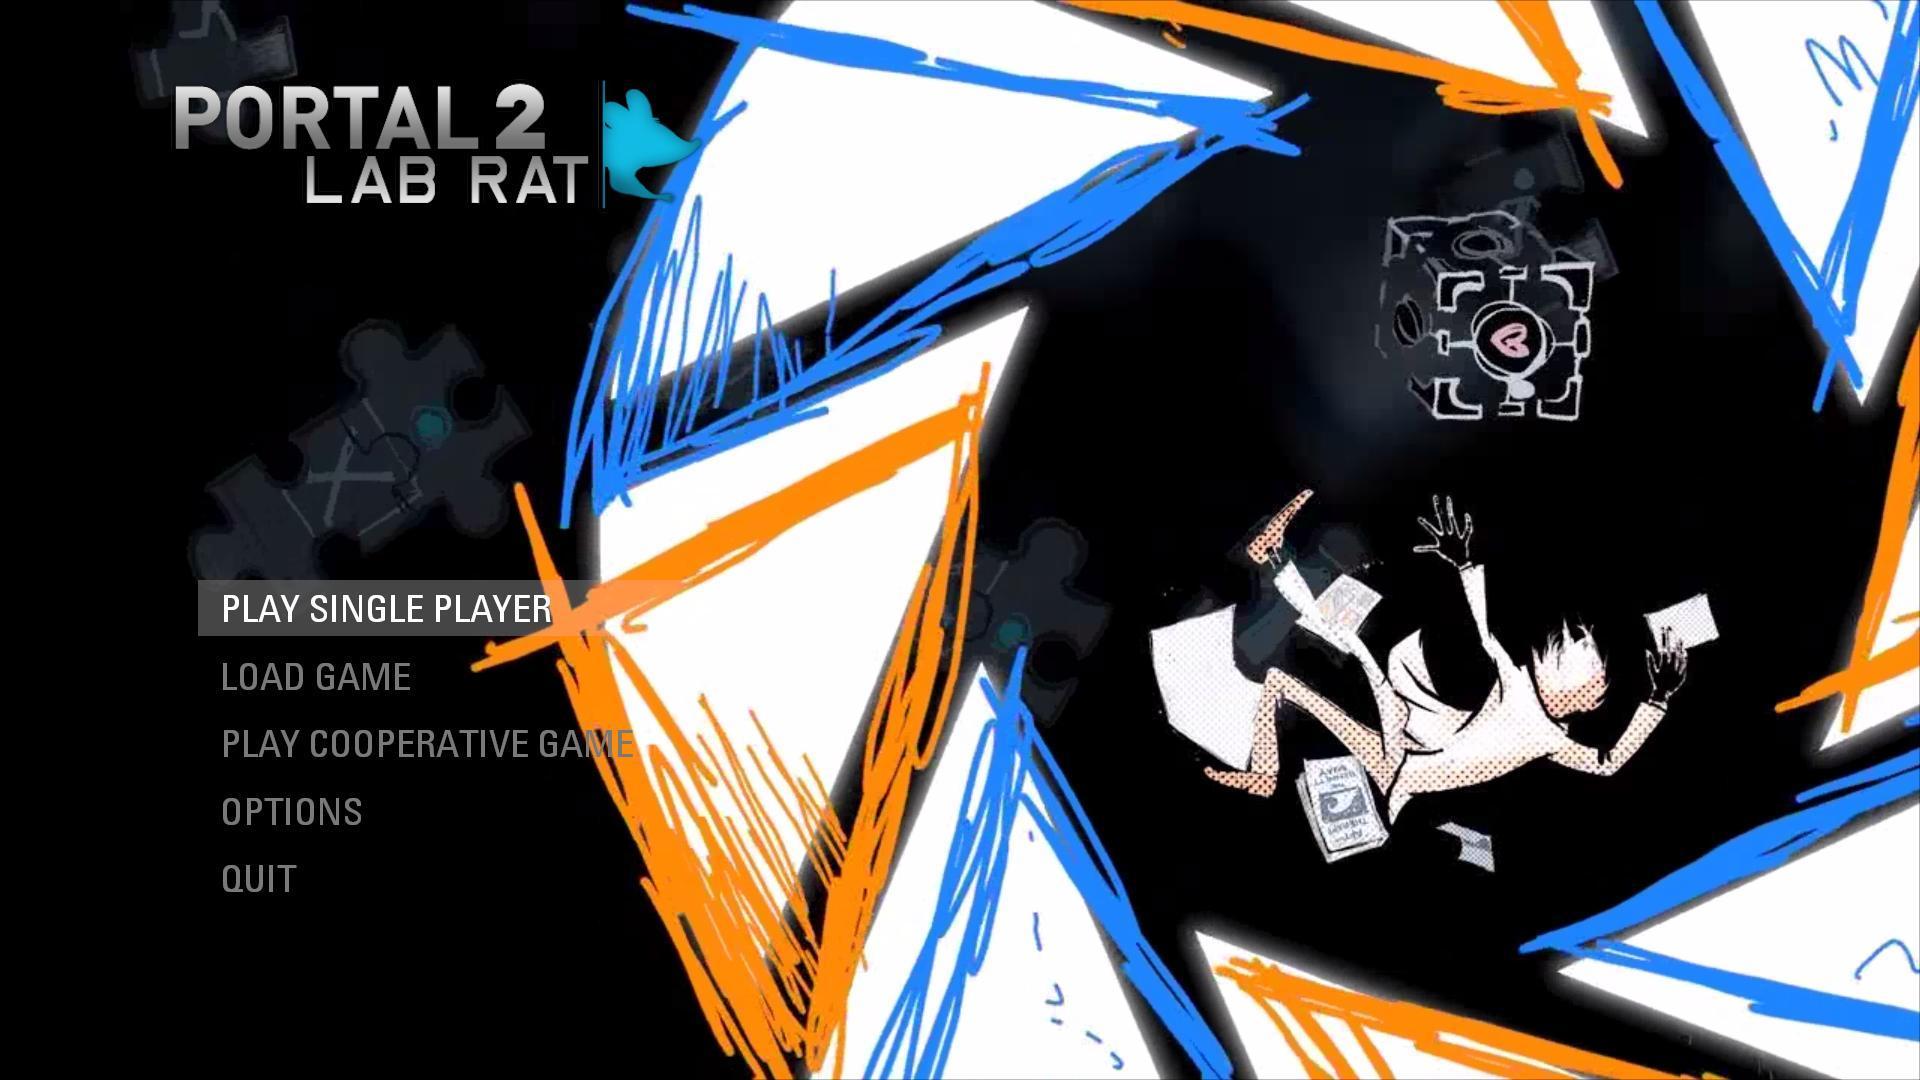 portal 2 main menu backgrounds - M Portal 2 Lab Rat Play Single Player Load Game Play Cooperative Game Ava Options Quit